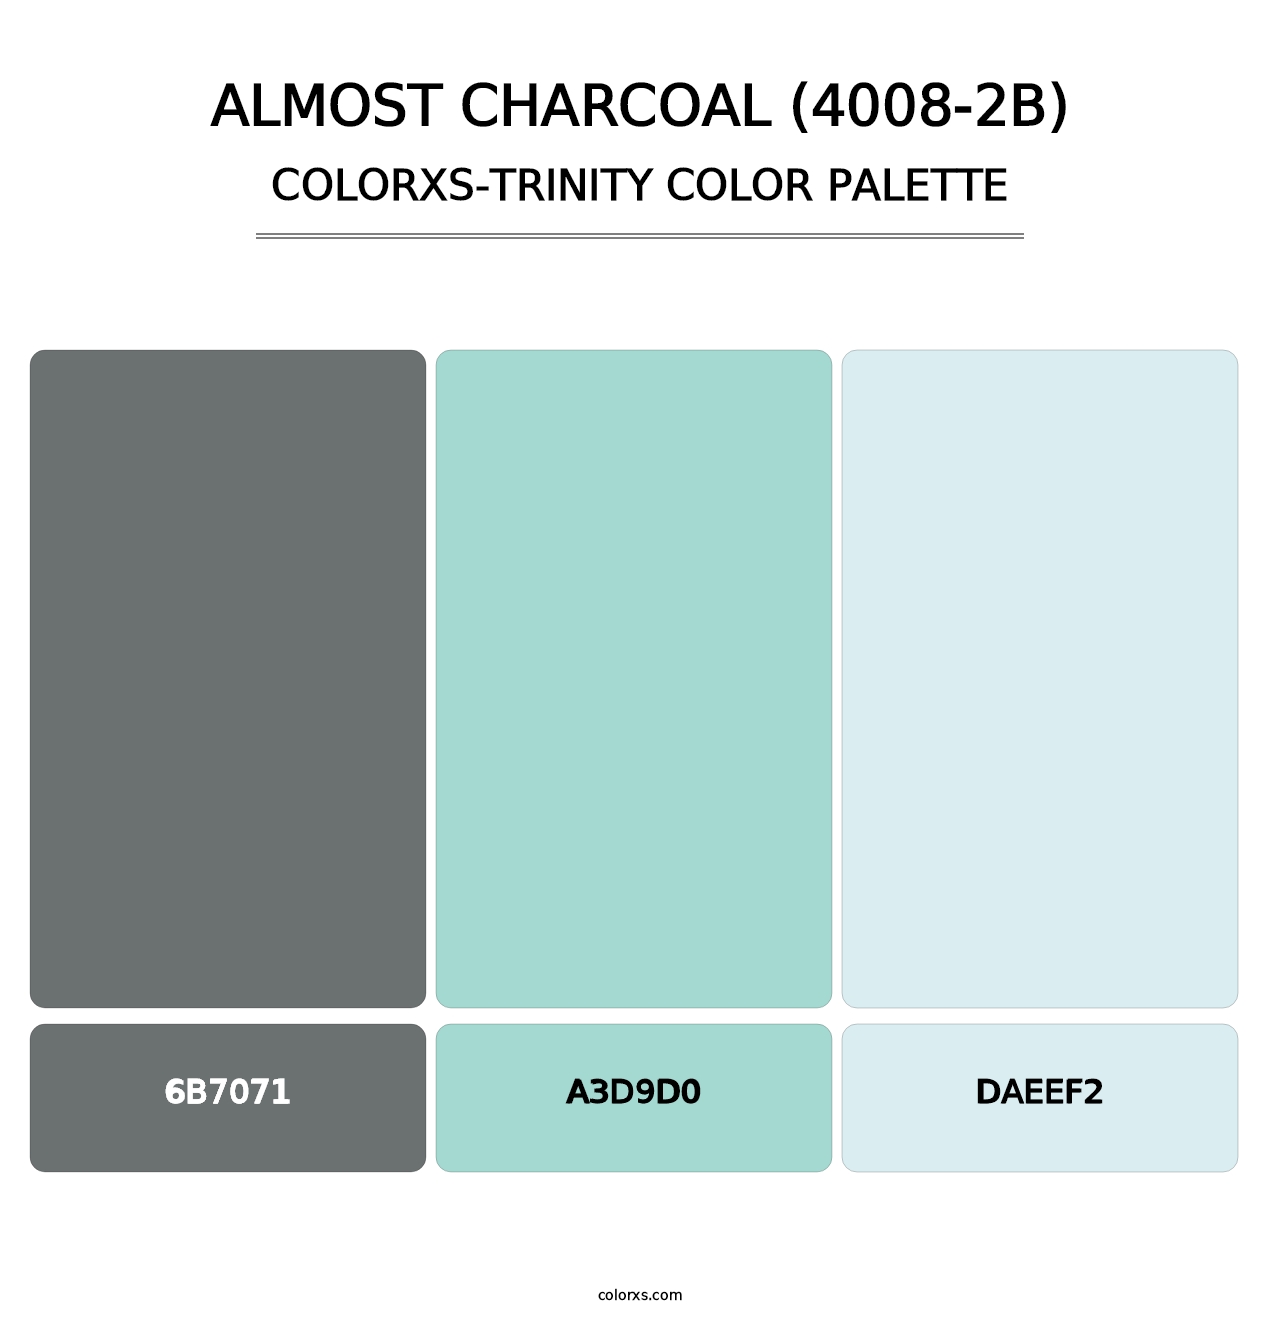 Almost Charcoal (4008-2B) - Colorxs Trinity Palette